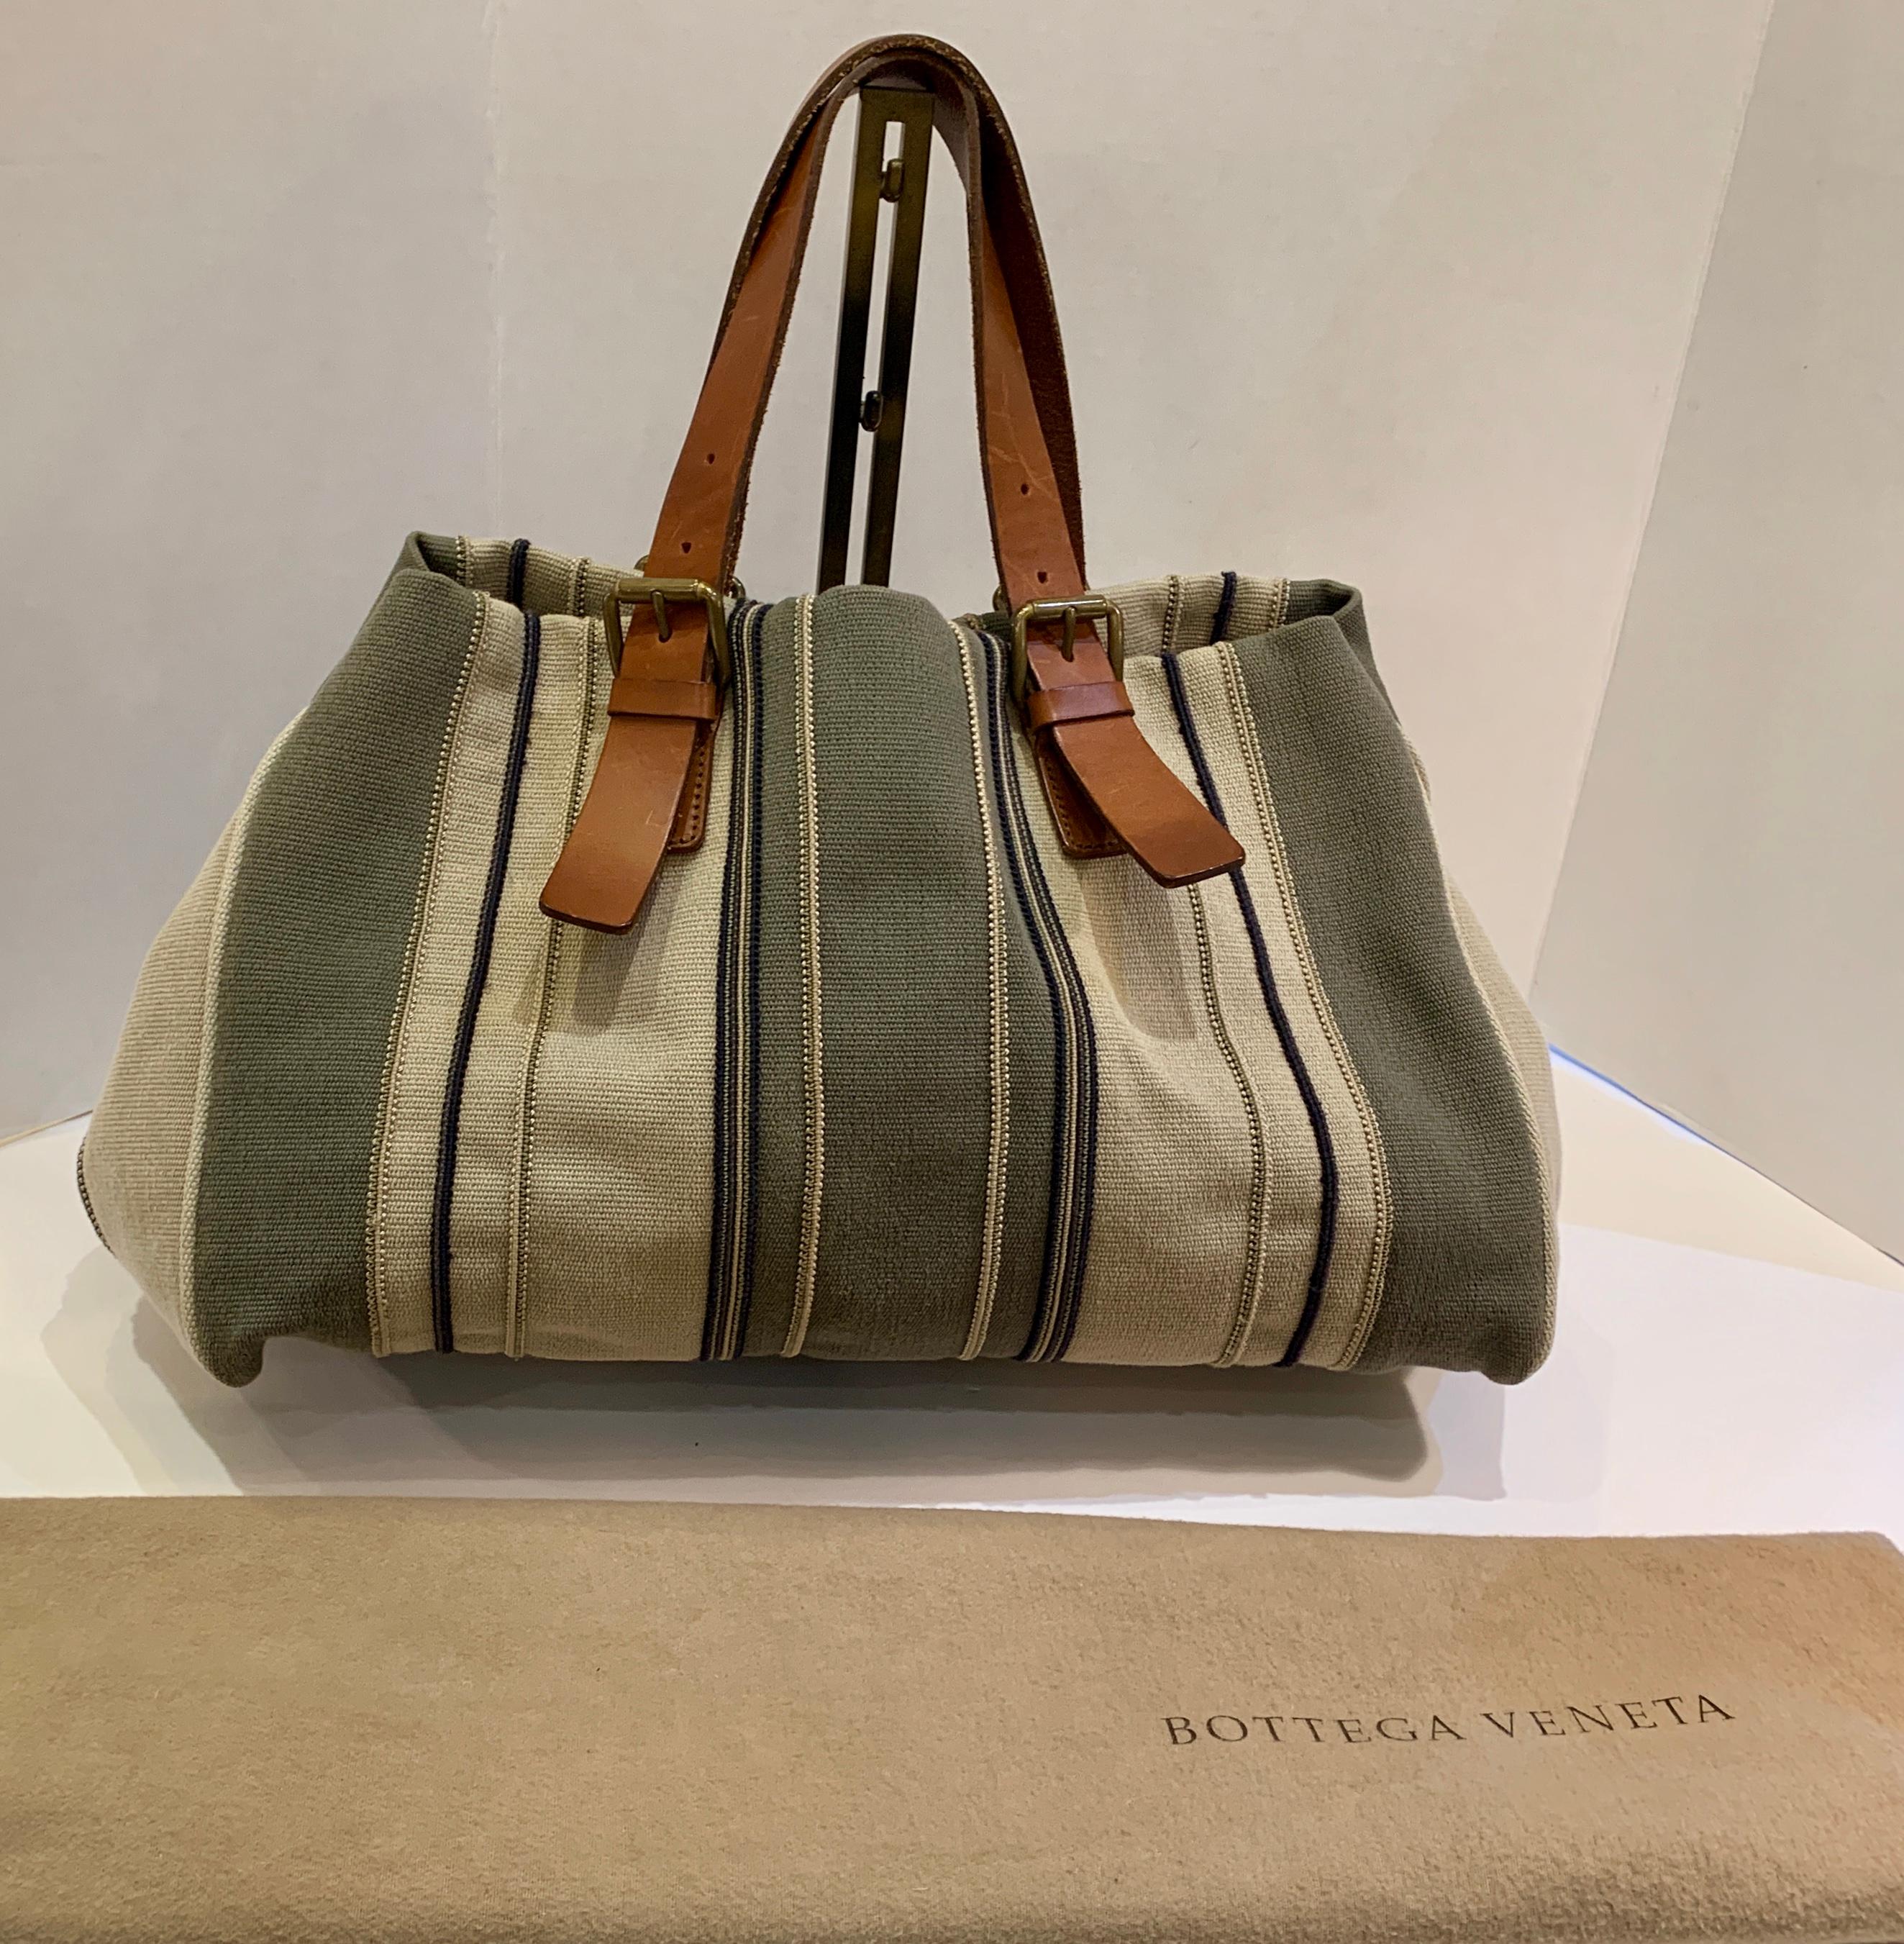 Bottega Veneta values quality craftsmanship, exclusivity and discreet luxury in the creation of its timeless handbags. This spacious, multi-colored, earth-toned striped canvas handbag or satchel features adjustable saddle colored distressed leather